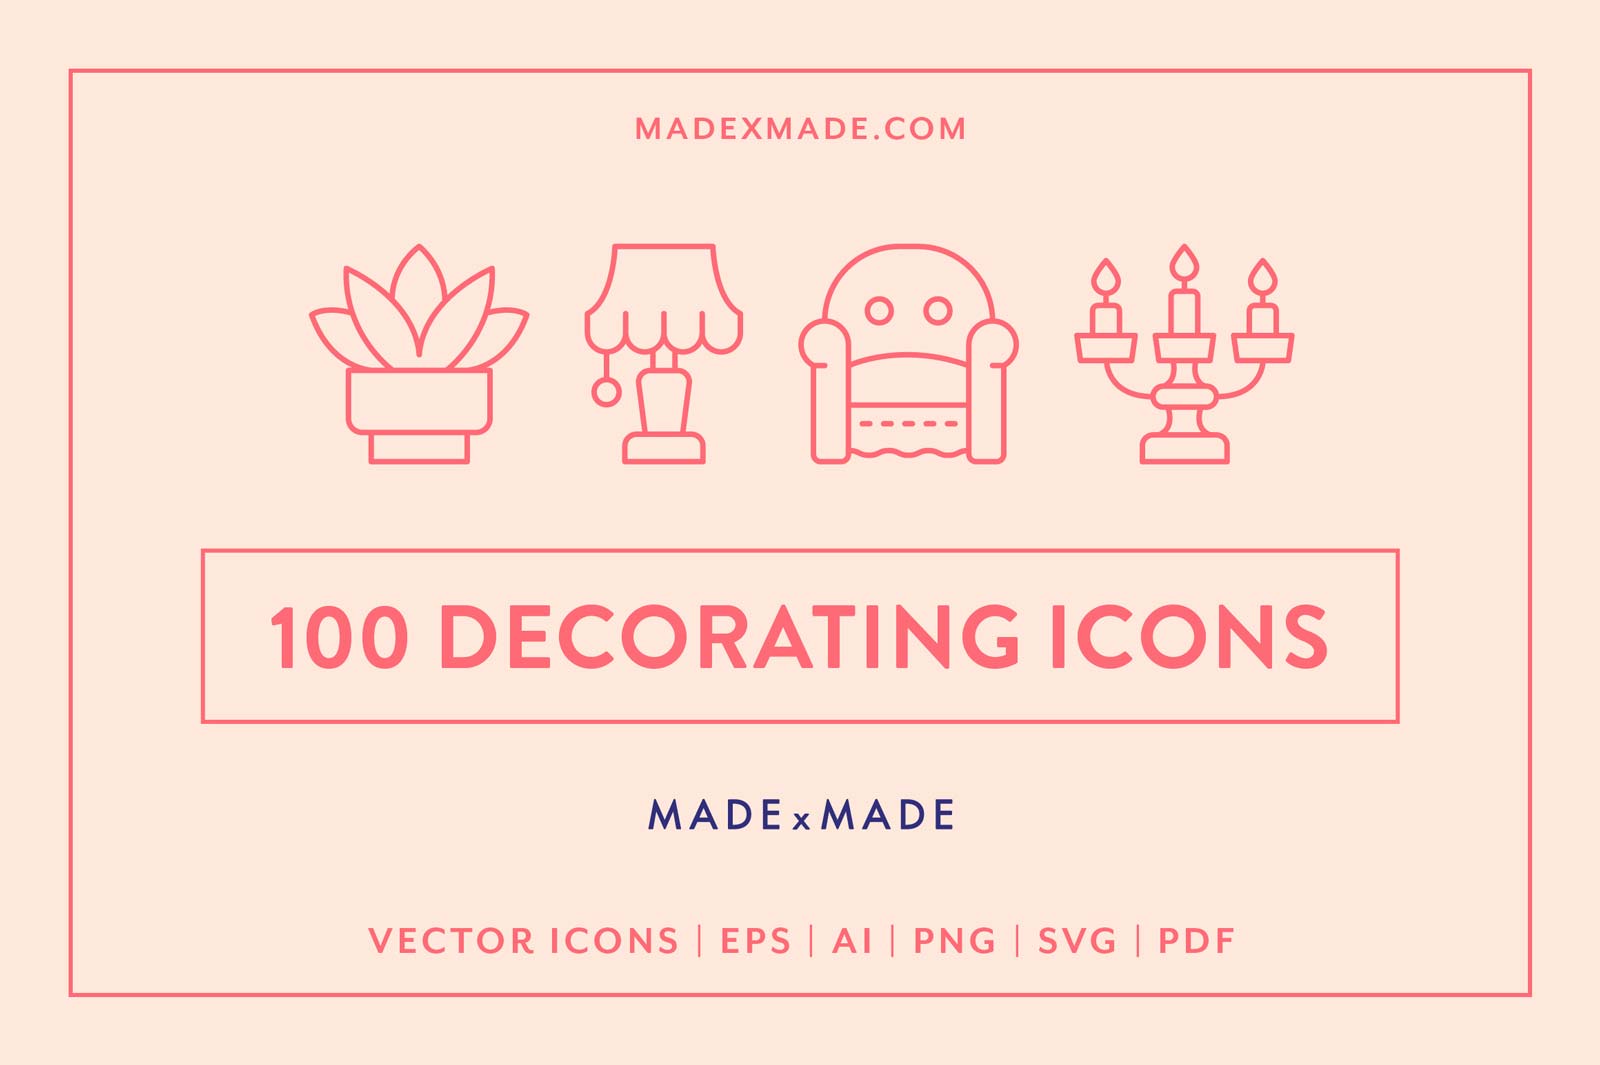 made x made icons decorating